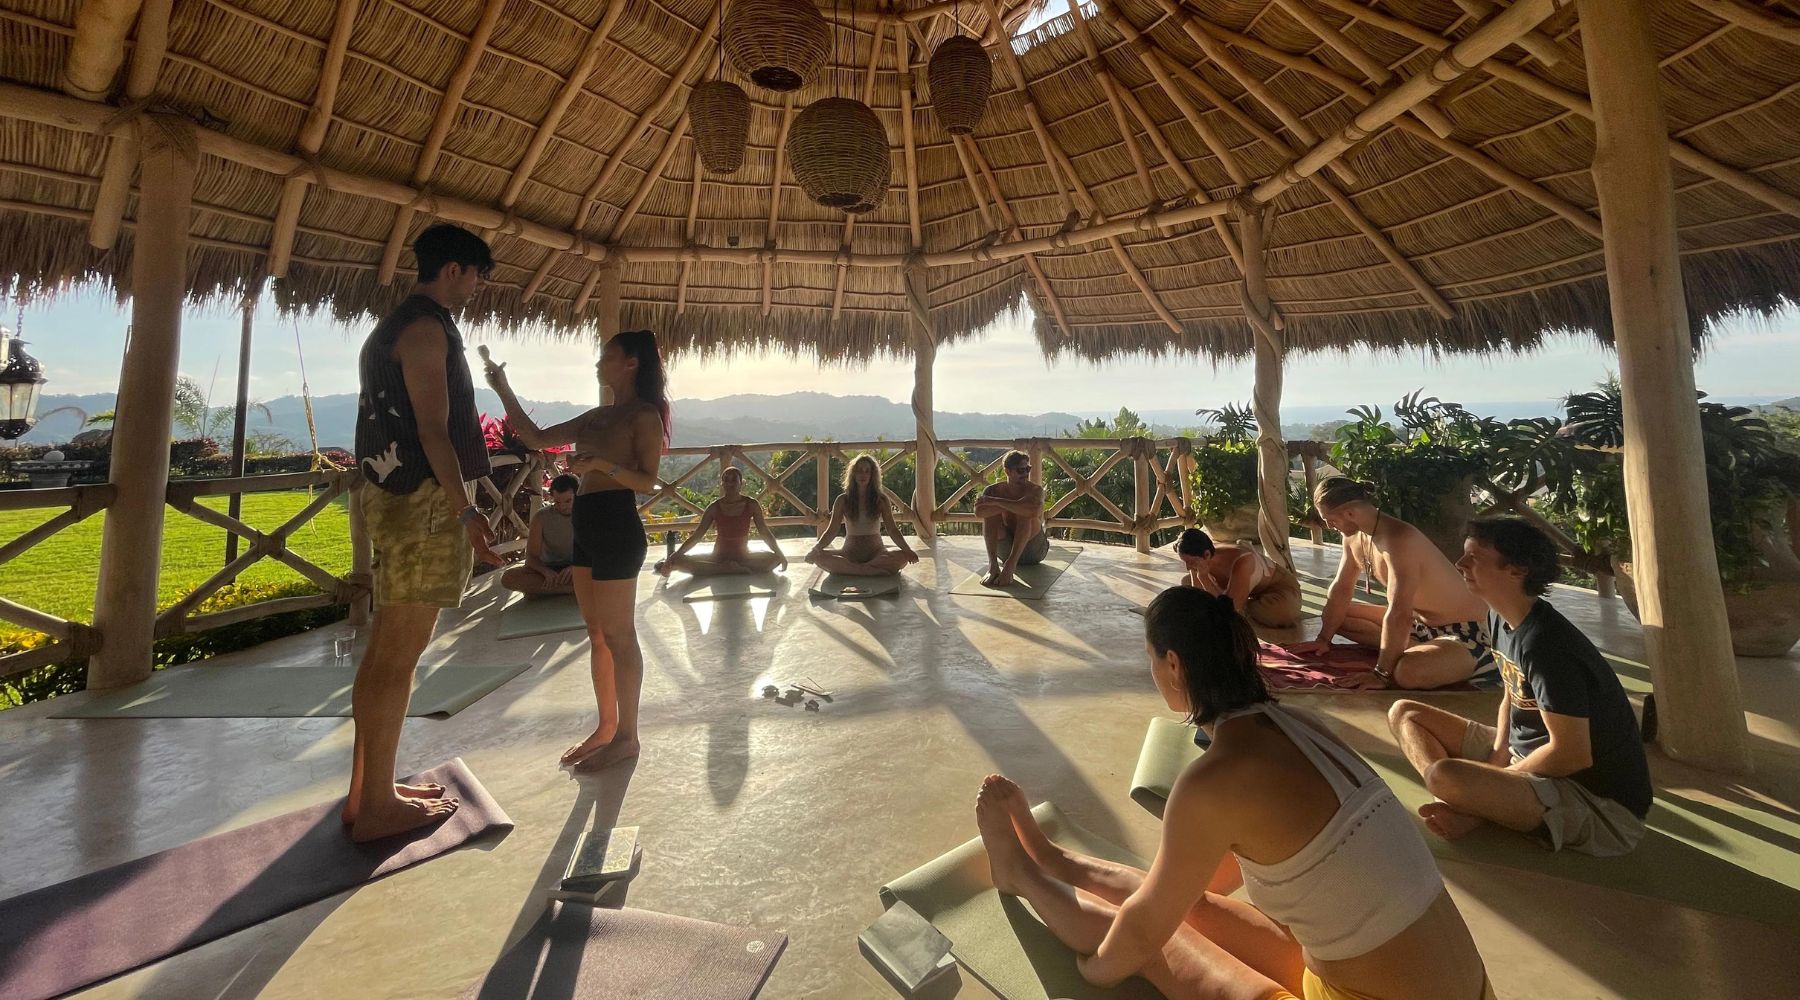 Yoga Retreats: 8 Things to Know as a Teacher or Student: by Soojin Kim